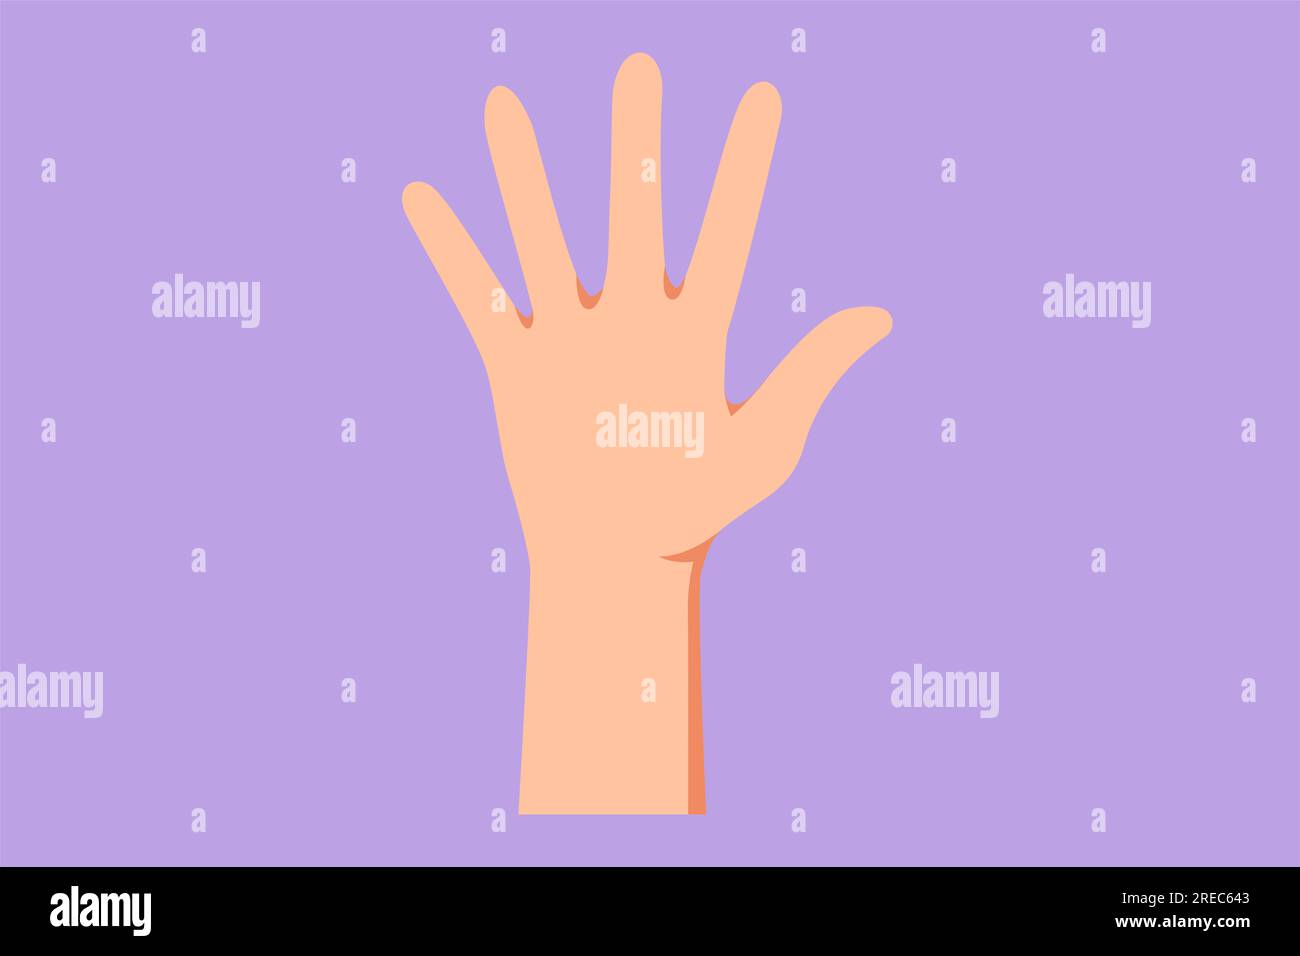 Character flat drawing hand count number five. Learn to count numbers. Concept of education for children. Nonverbal signs or symbols. High five symbol Stock Photo